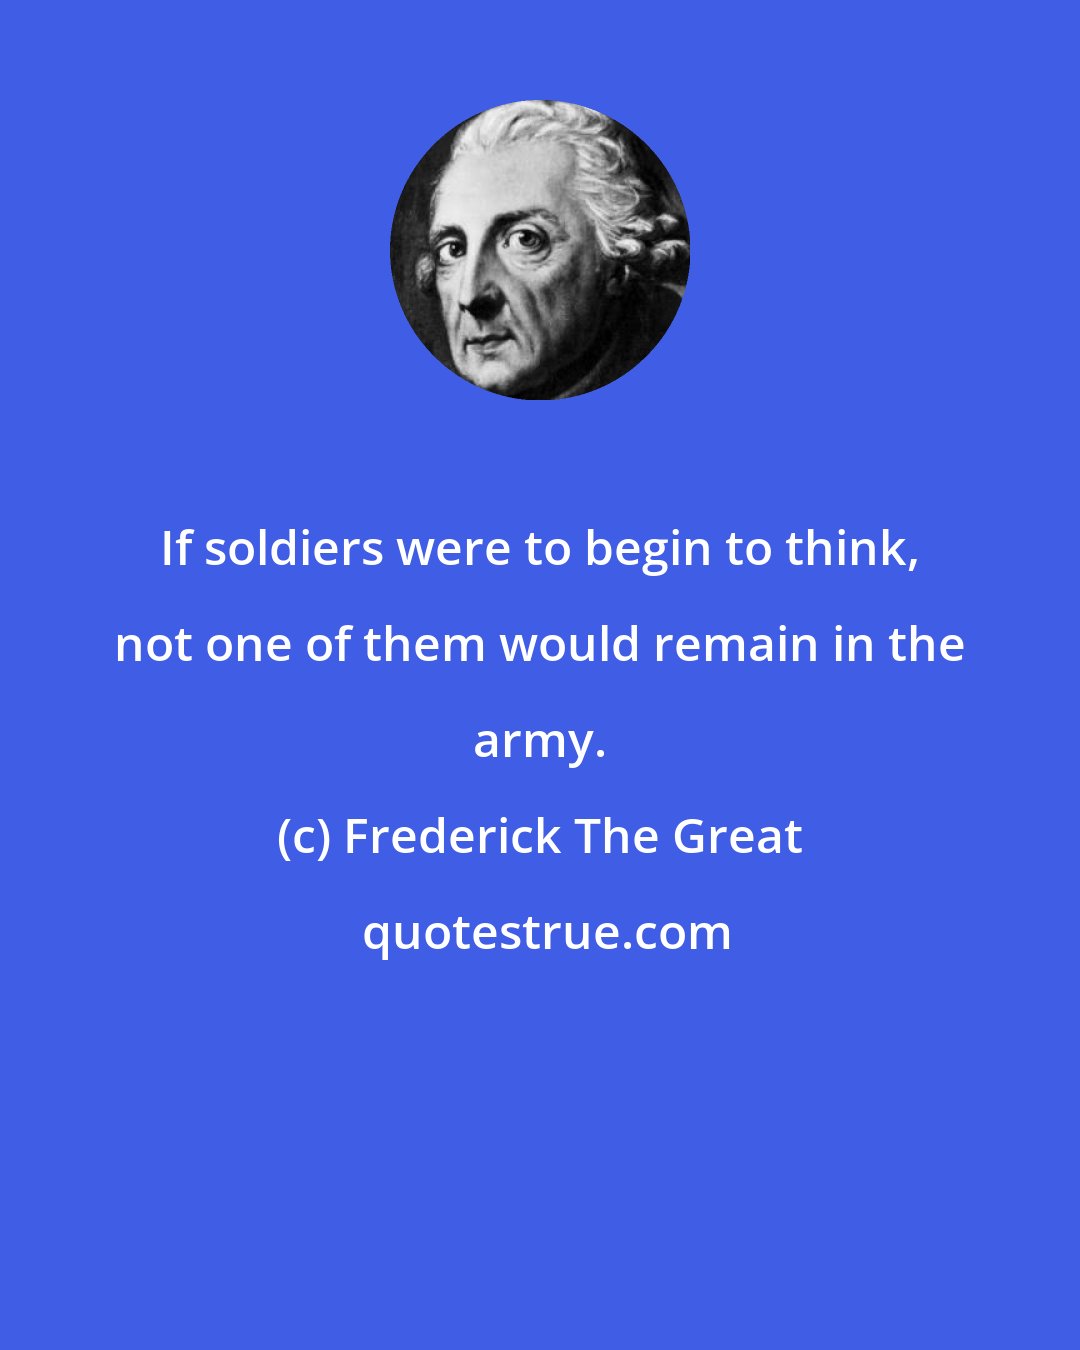 Frederick The Great: If soldiers were to begin to think, not one of them would remain in the army.